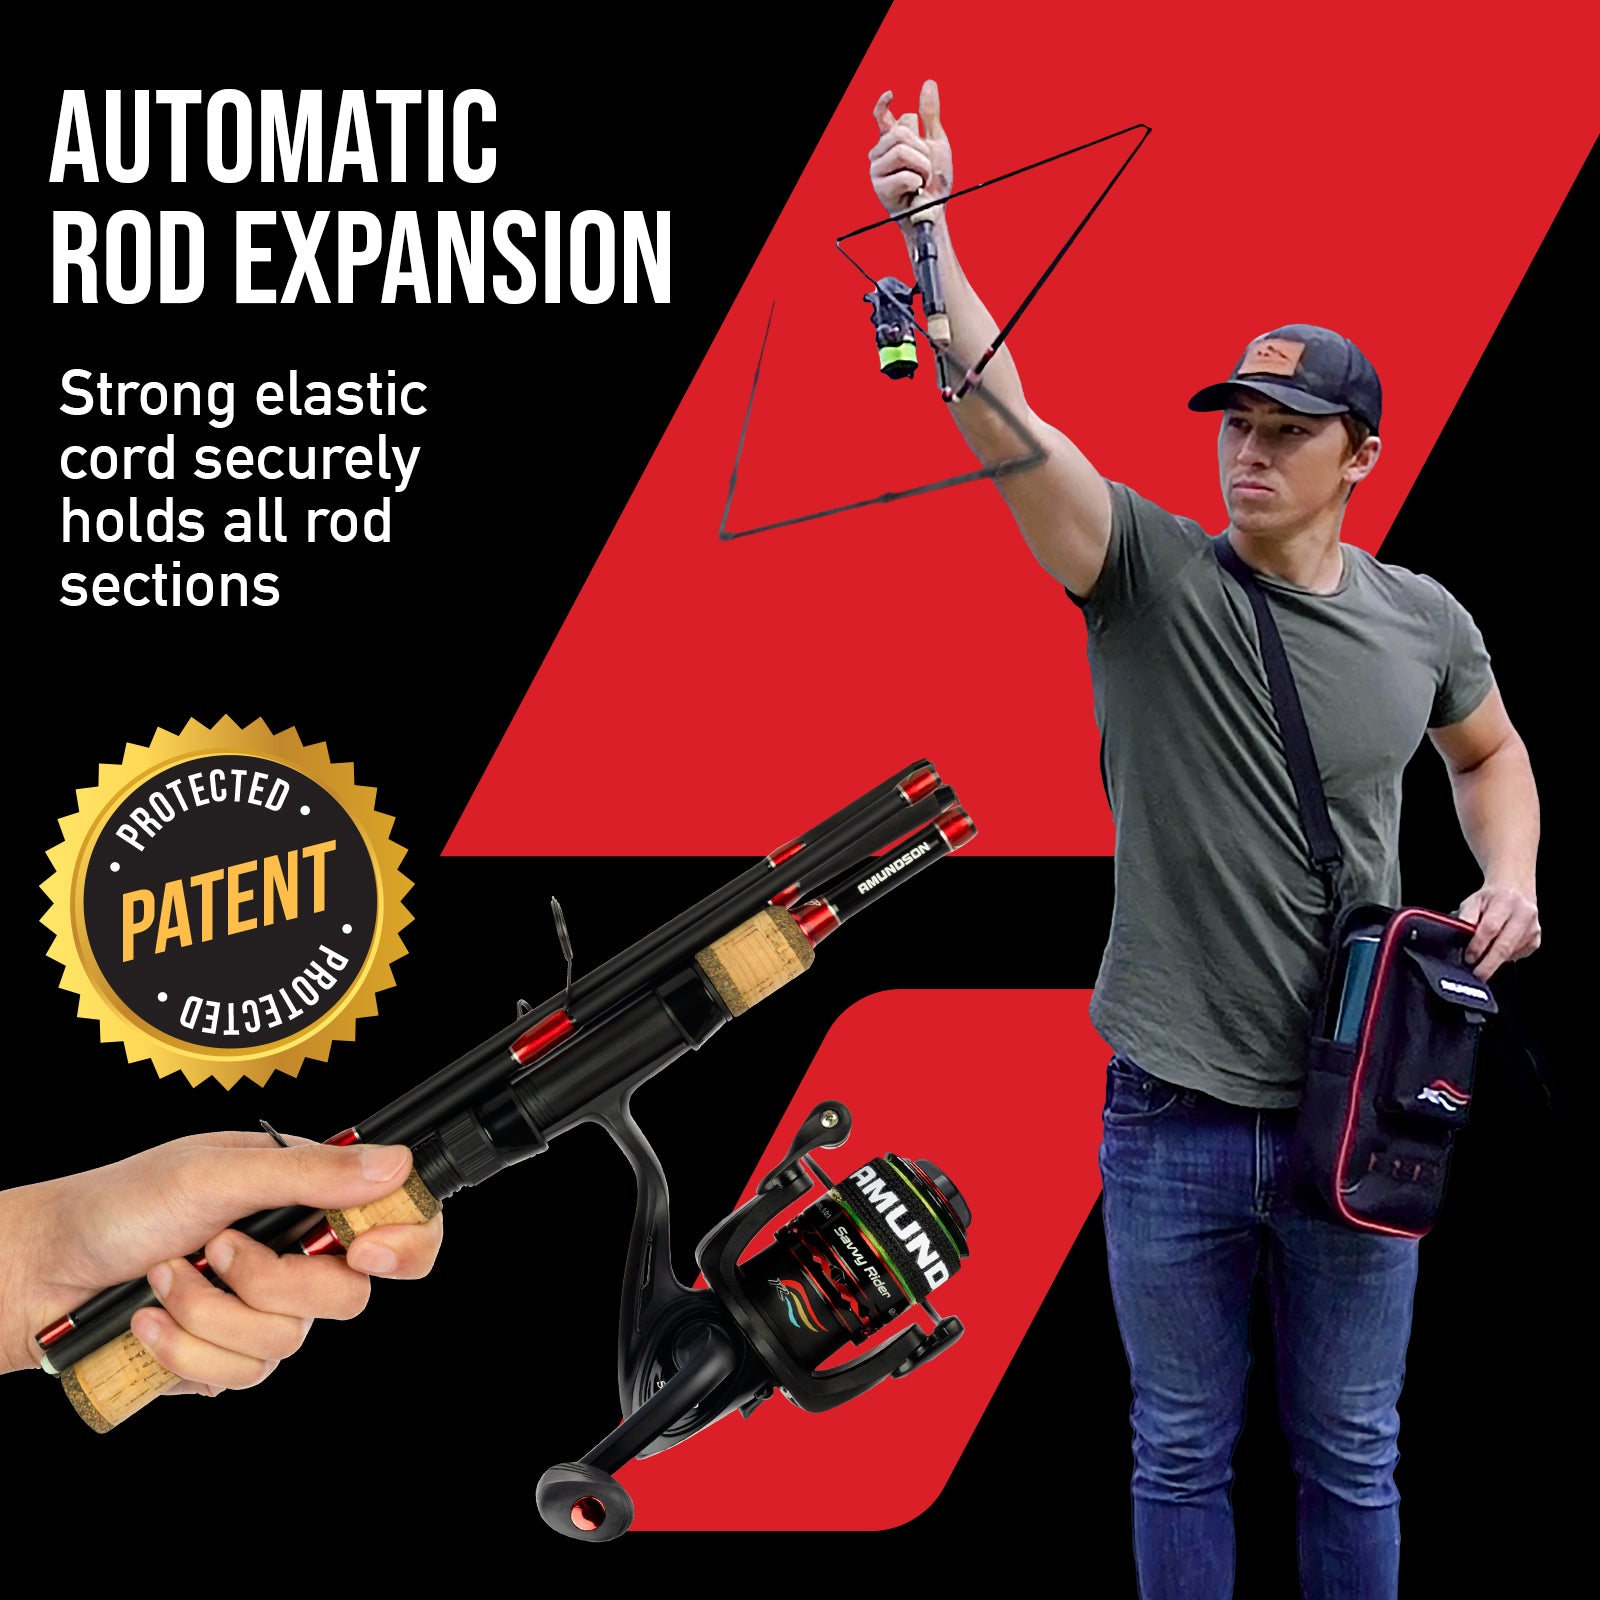 Amundson Savvy Rider Fishing Rod and Reel Combo Automatic Expansion Graphite Carbon Rod Aluminum Spool Reel Portable Travel Camping Kit All Season